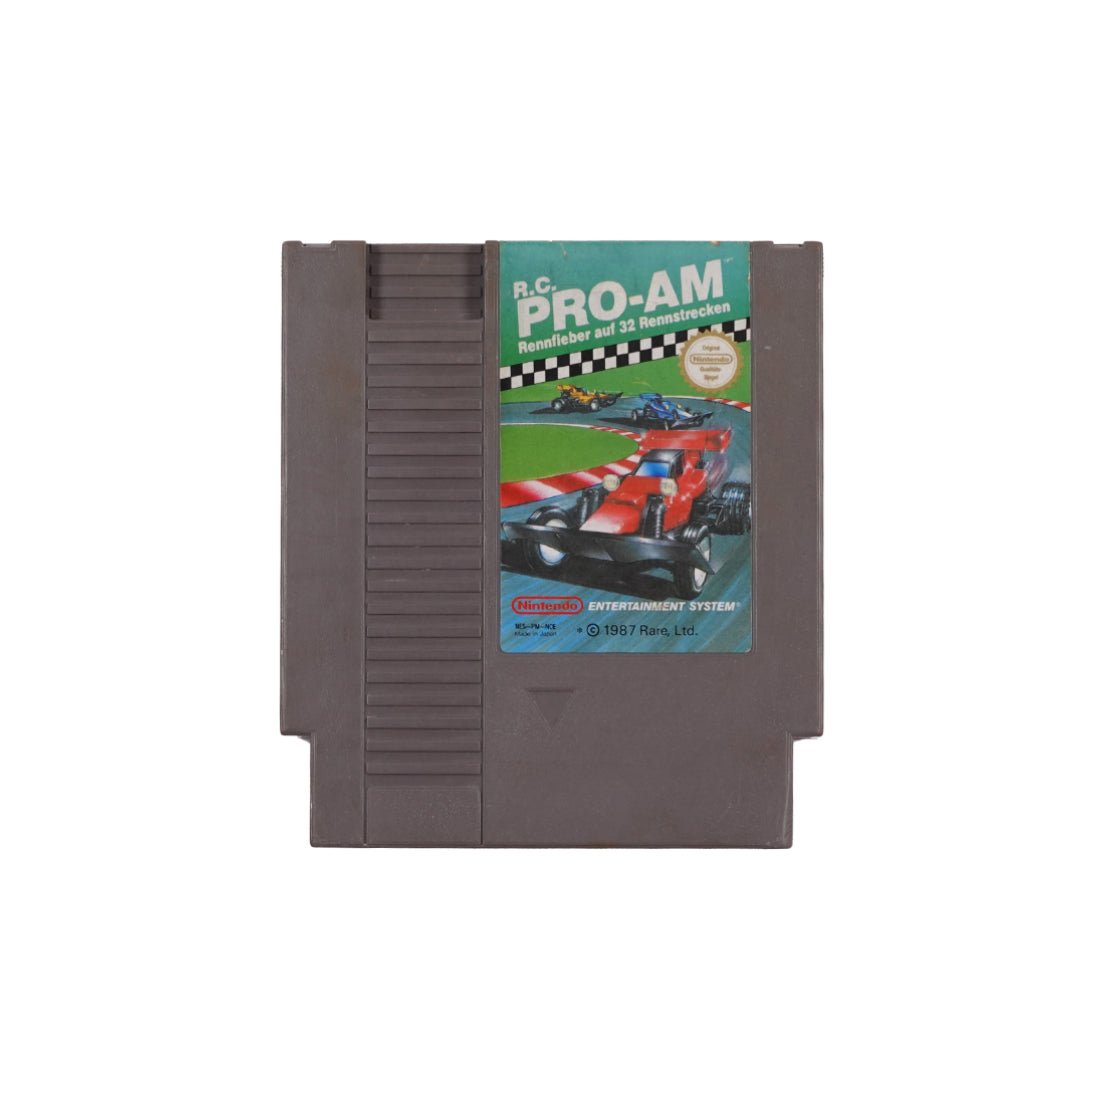 (Pre-Owned) R.C. PRO-AM - Nintendo Entertainment System - Store 974 | ستور ٩٧٤